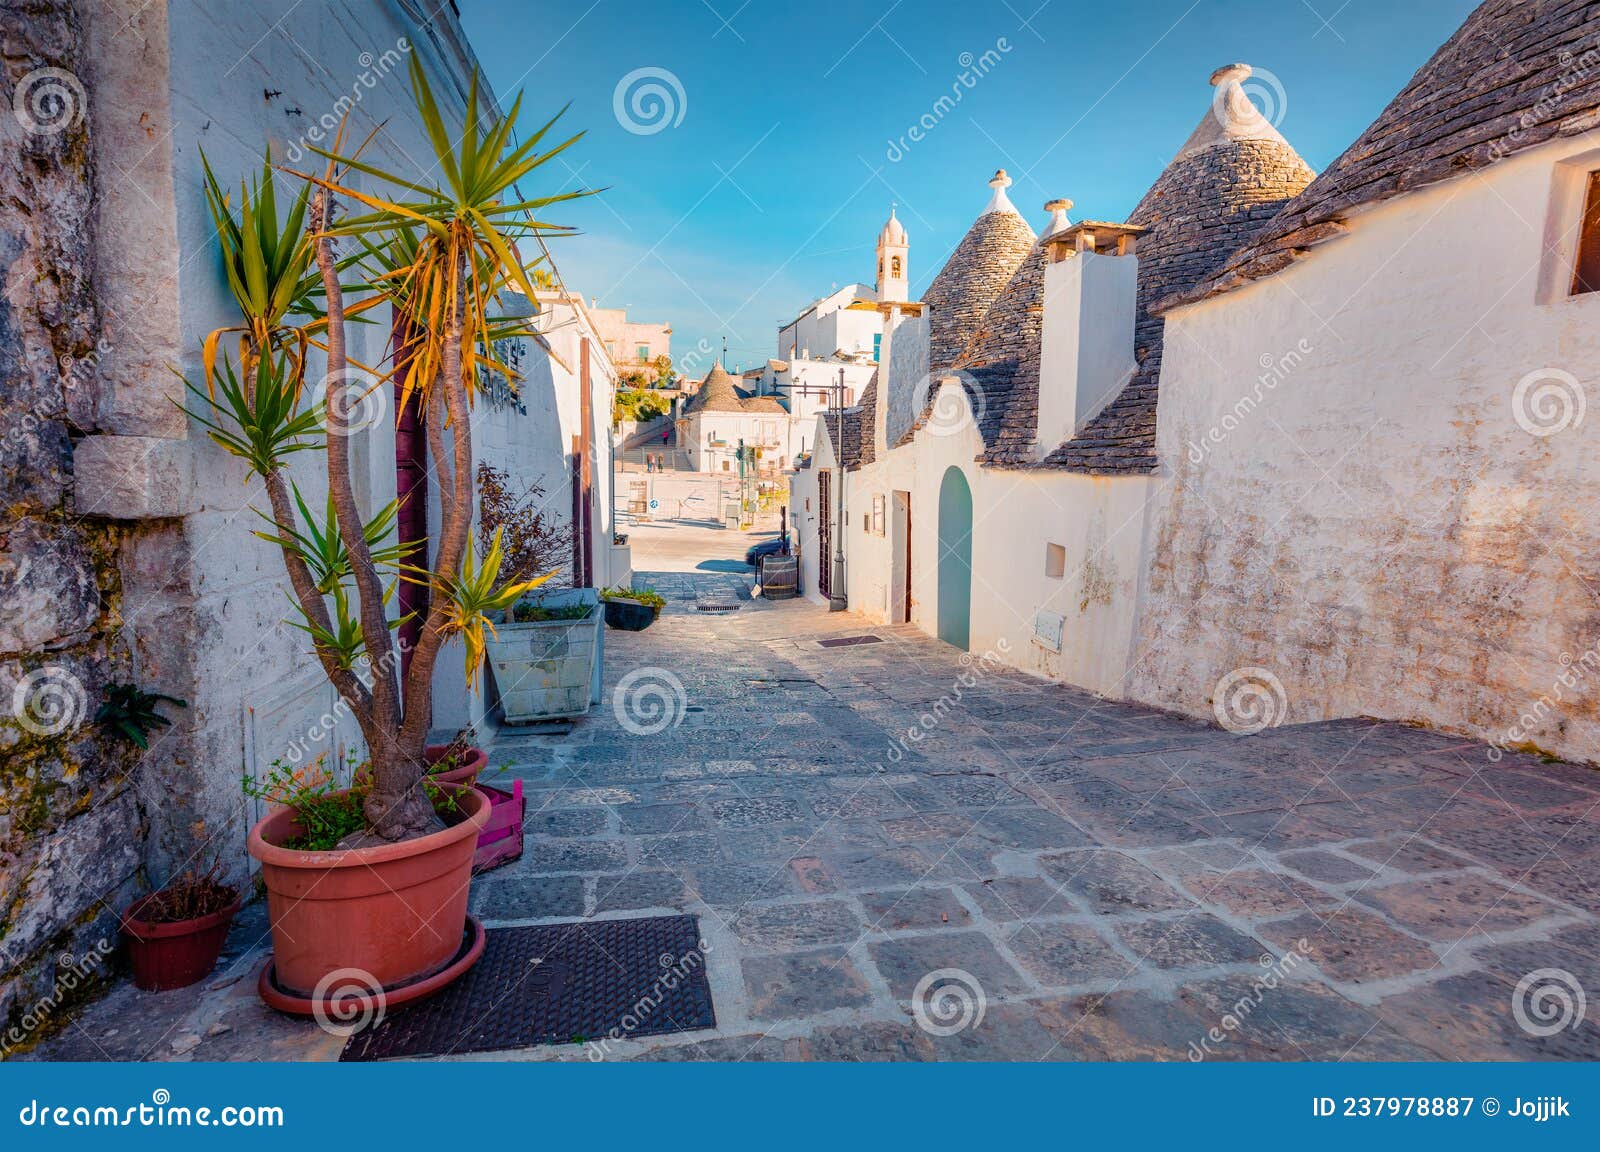 attractive morning view of strret with trullo trulli -  traditional apulian dry stone hut with a conical roof.